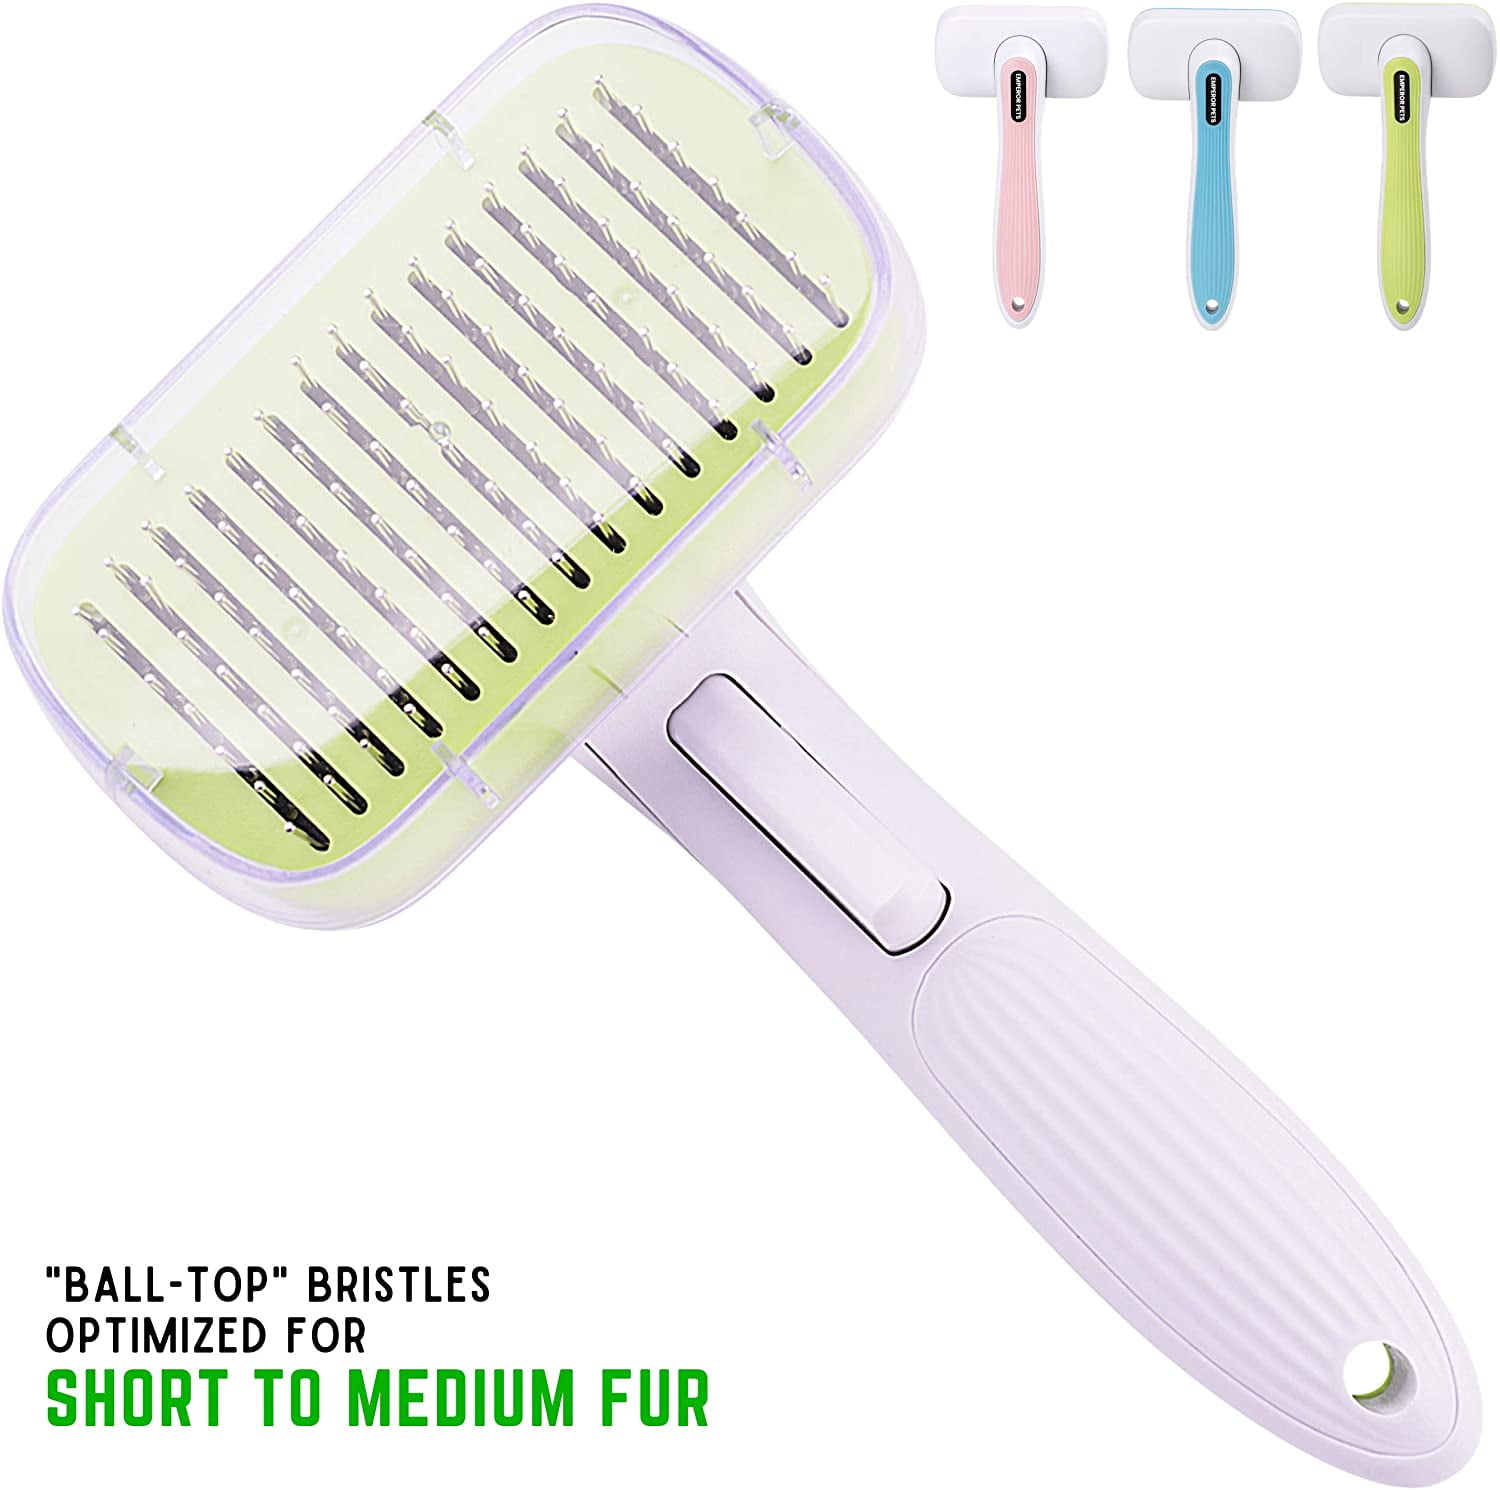 Safe and Gentle Plastic Claw Teeth Pet Hair Brush Grooming Knots and Tangles YHuHY Pet Dogs Cats Shell Comb 2 in 1 Mini Design Deshedding Brush and Massage Comb Removing Matted Fur 